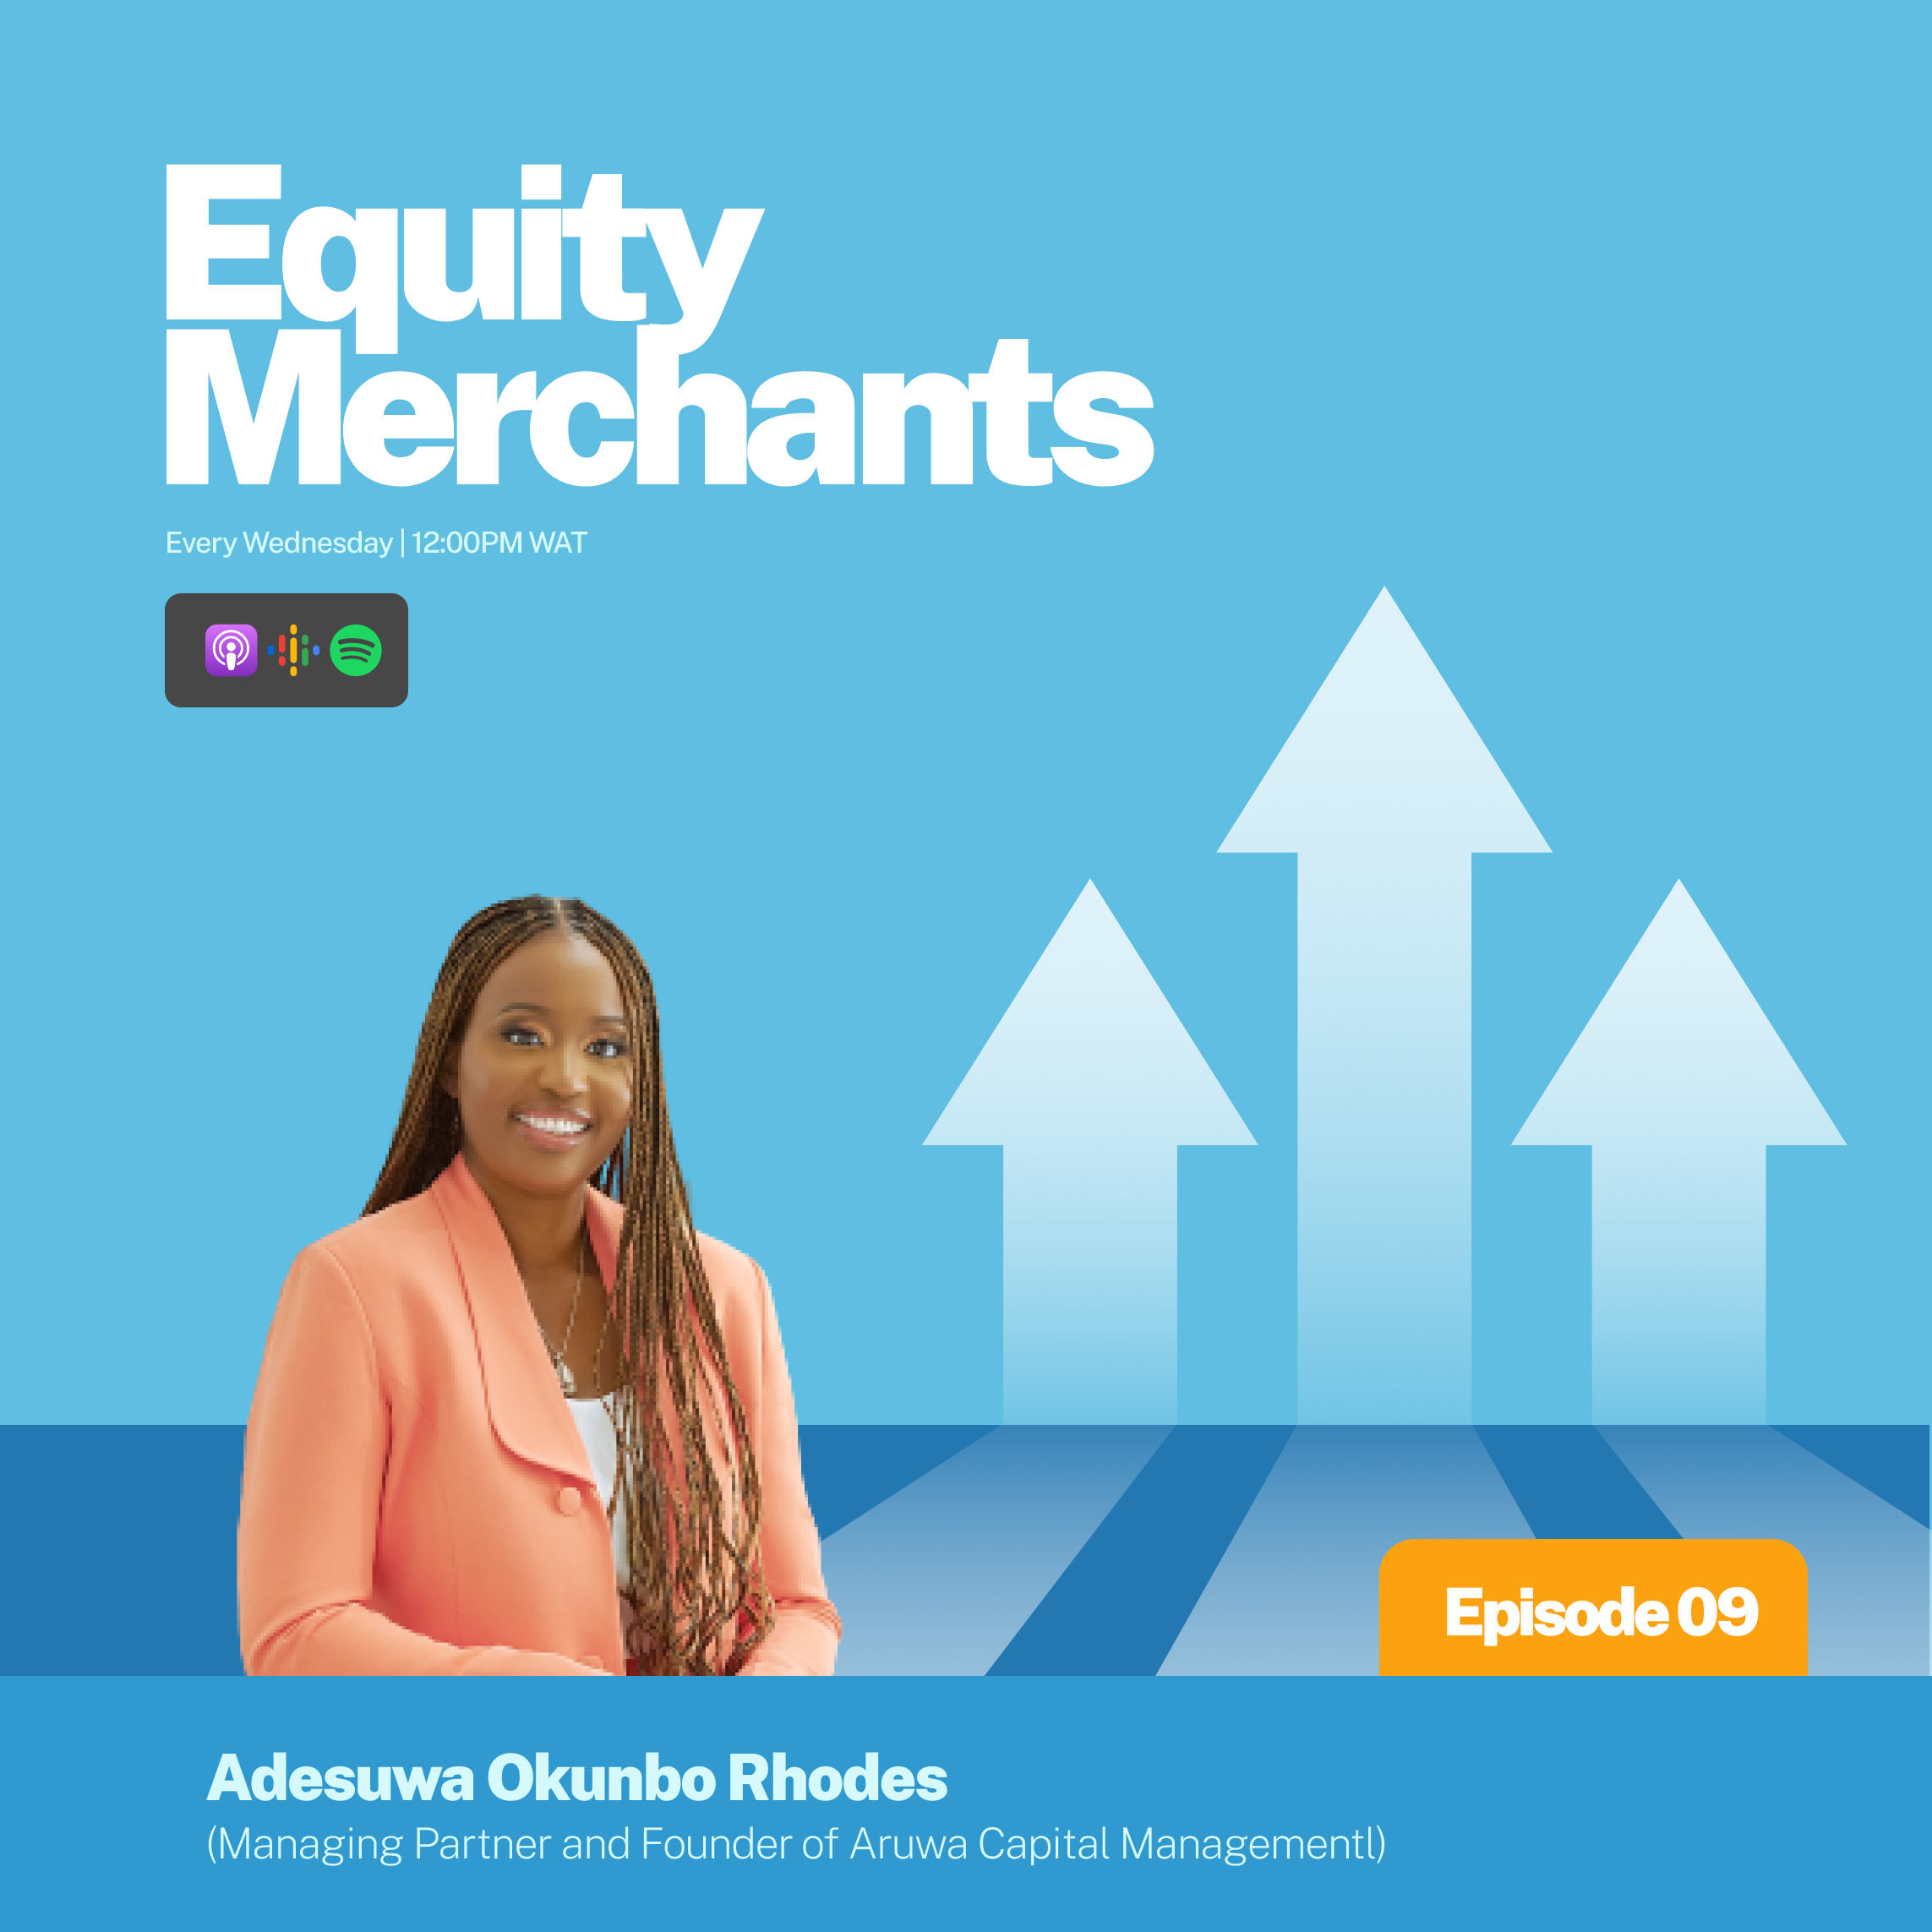 Aruwa Capital Management's Adesuwa Okunbo Rhodes on the need to invest in female founders, experience raising funds as a woman, when startups are ready for VC investment, and Aruwa Capital's value to startups.